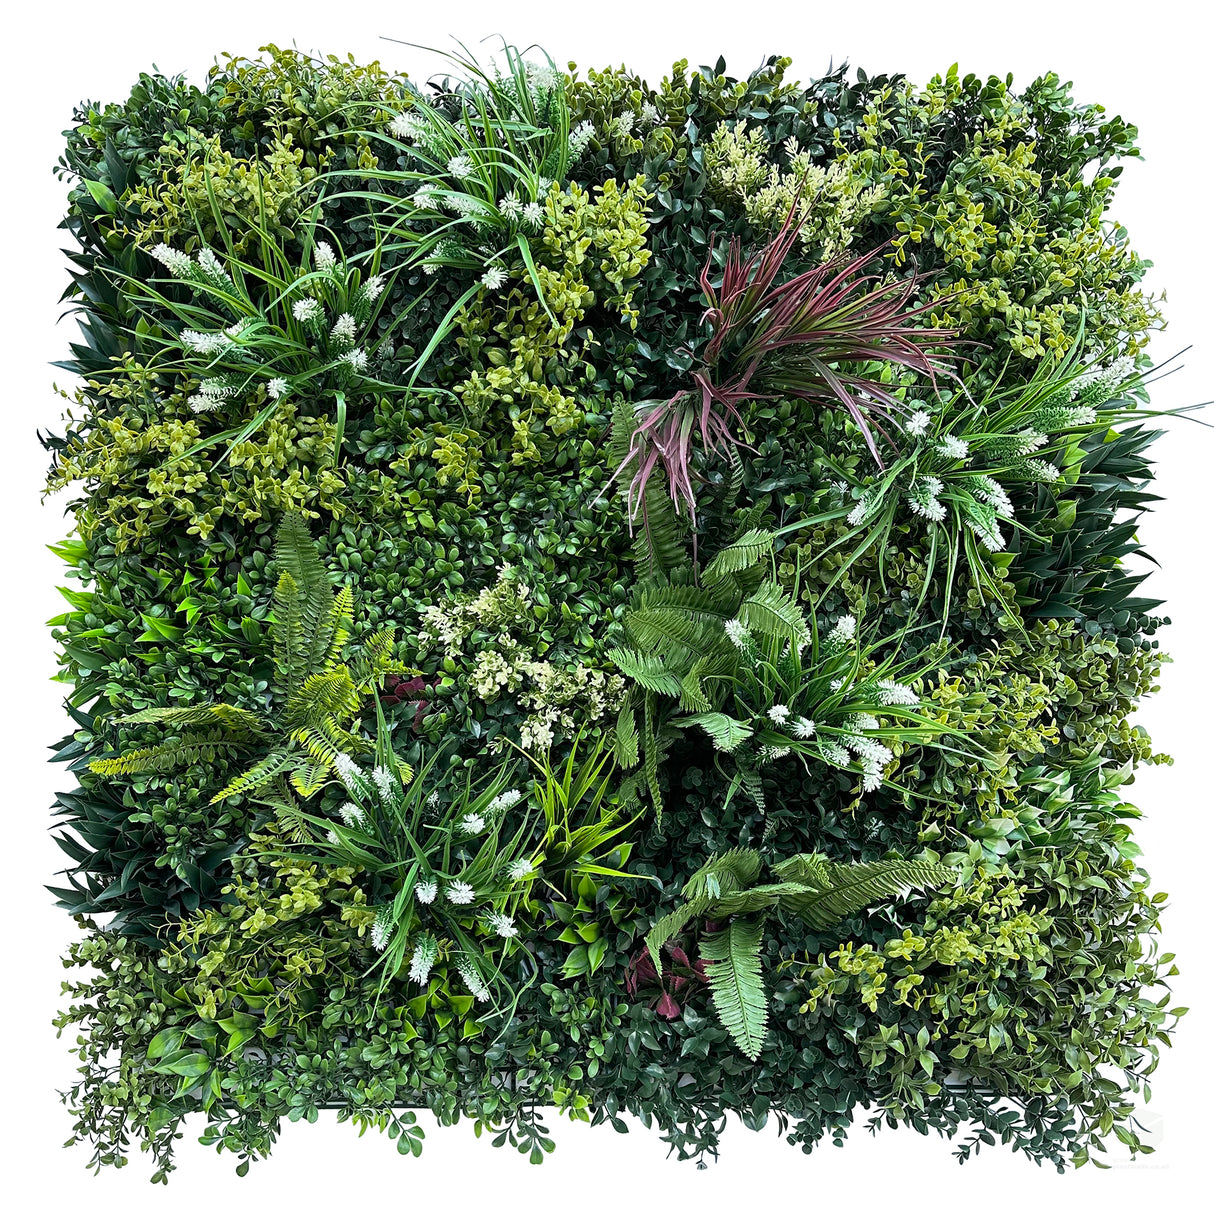 Artificial green wall 1m2 panel with mixed green foliage with yellow and white flowers